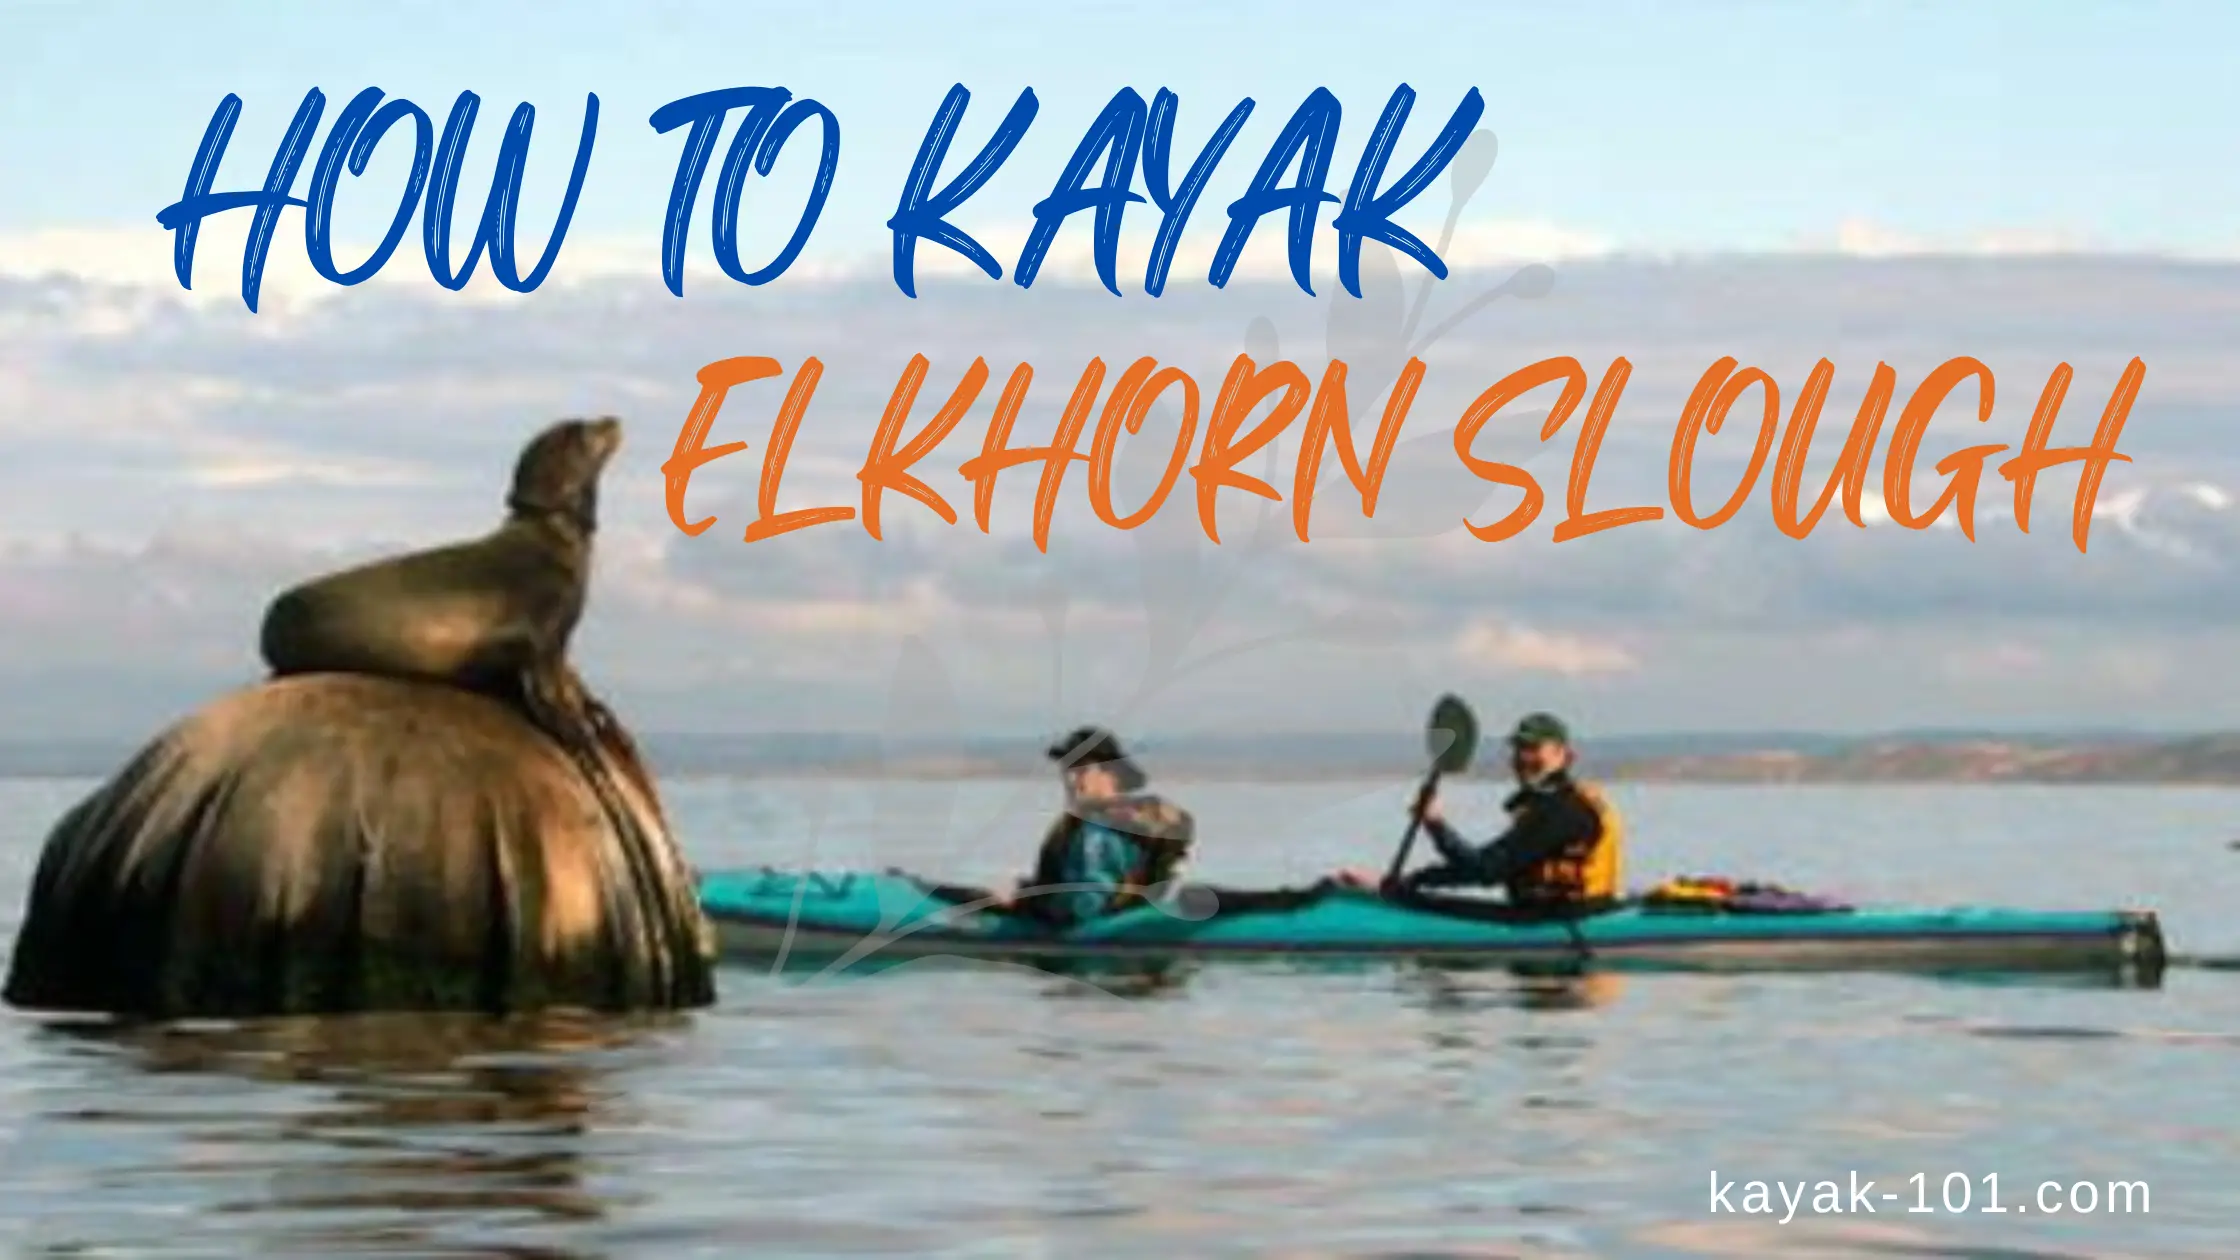 how to kayak to elkhorn slough